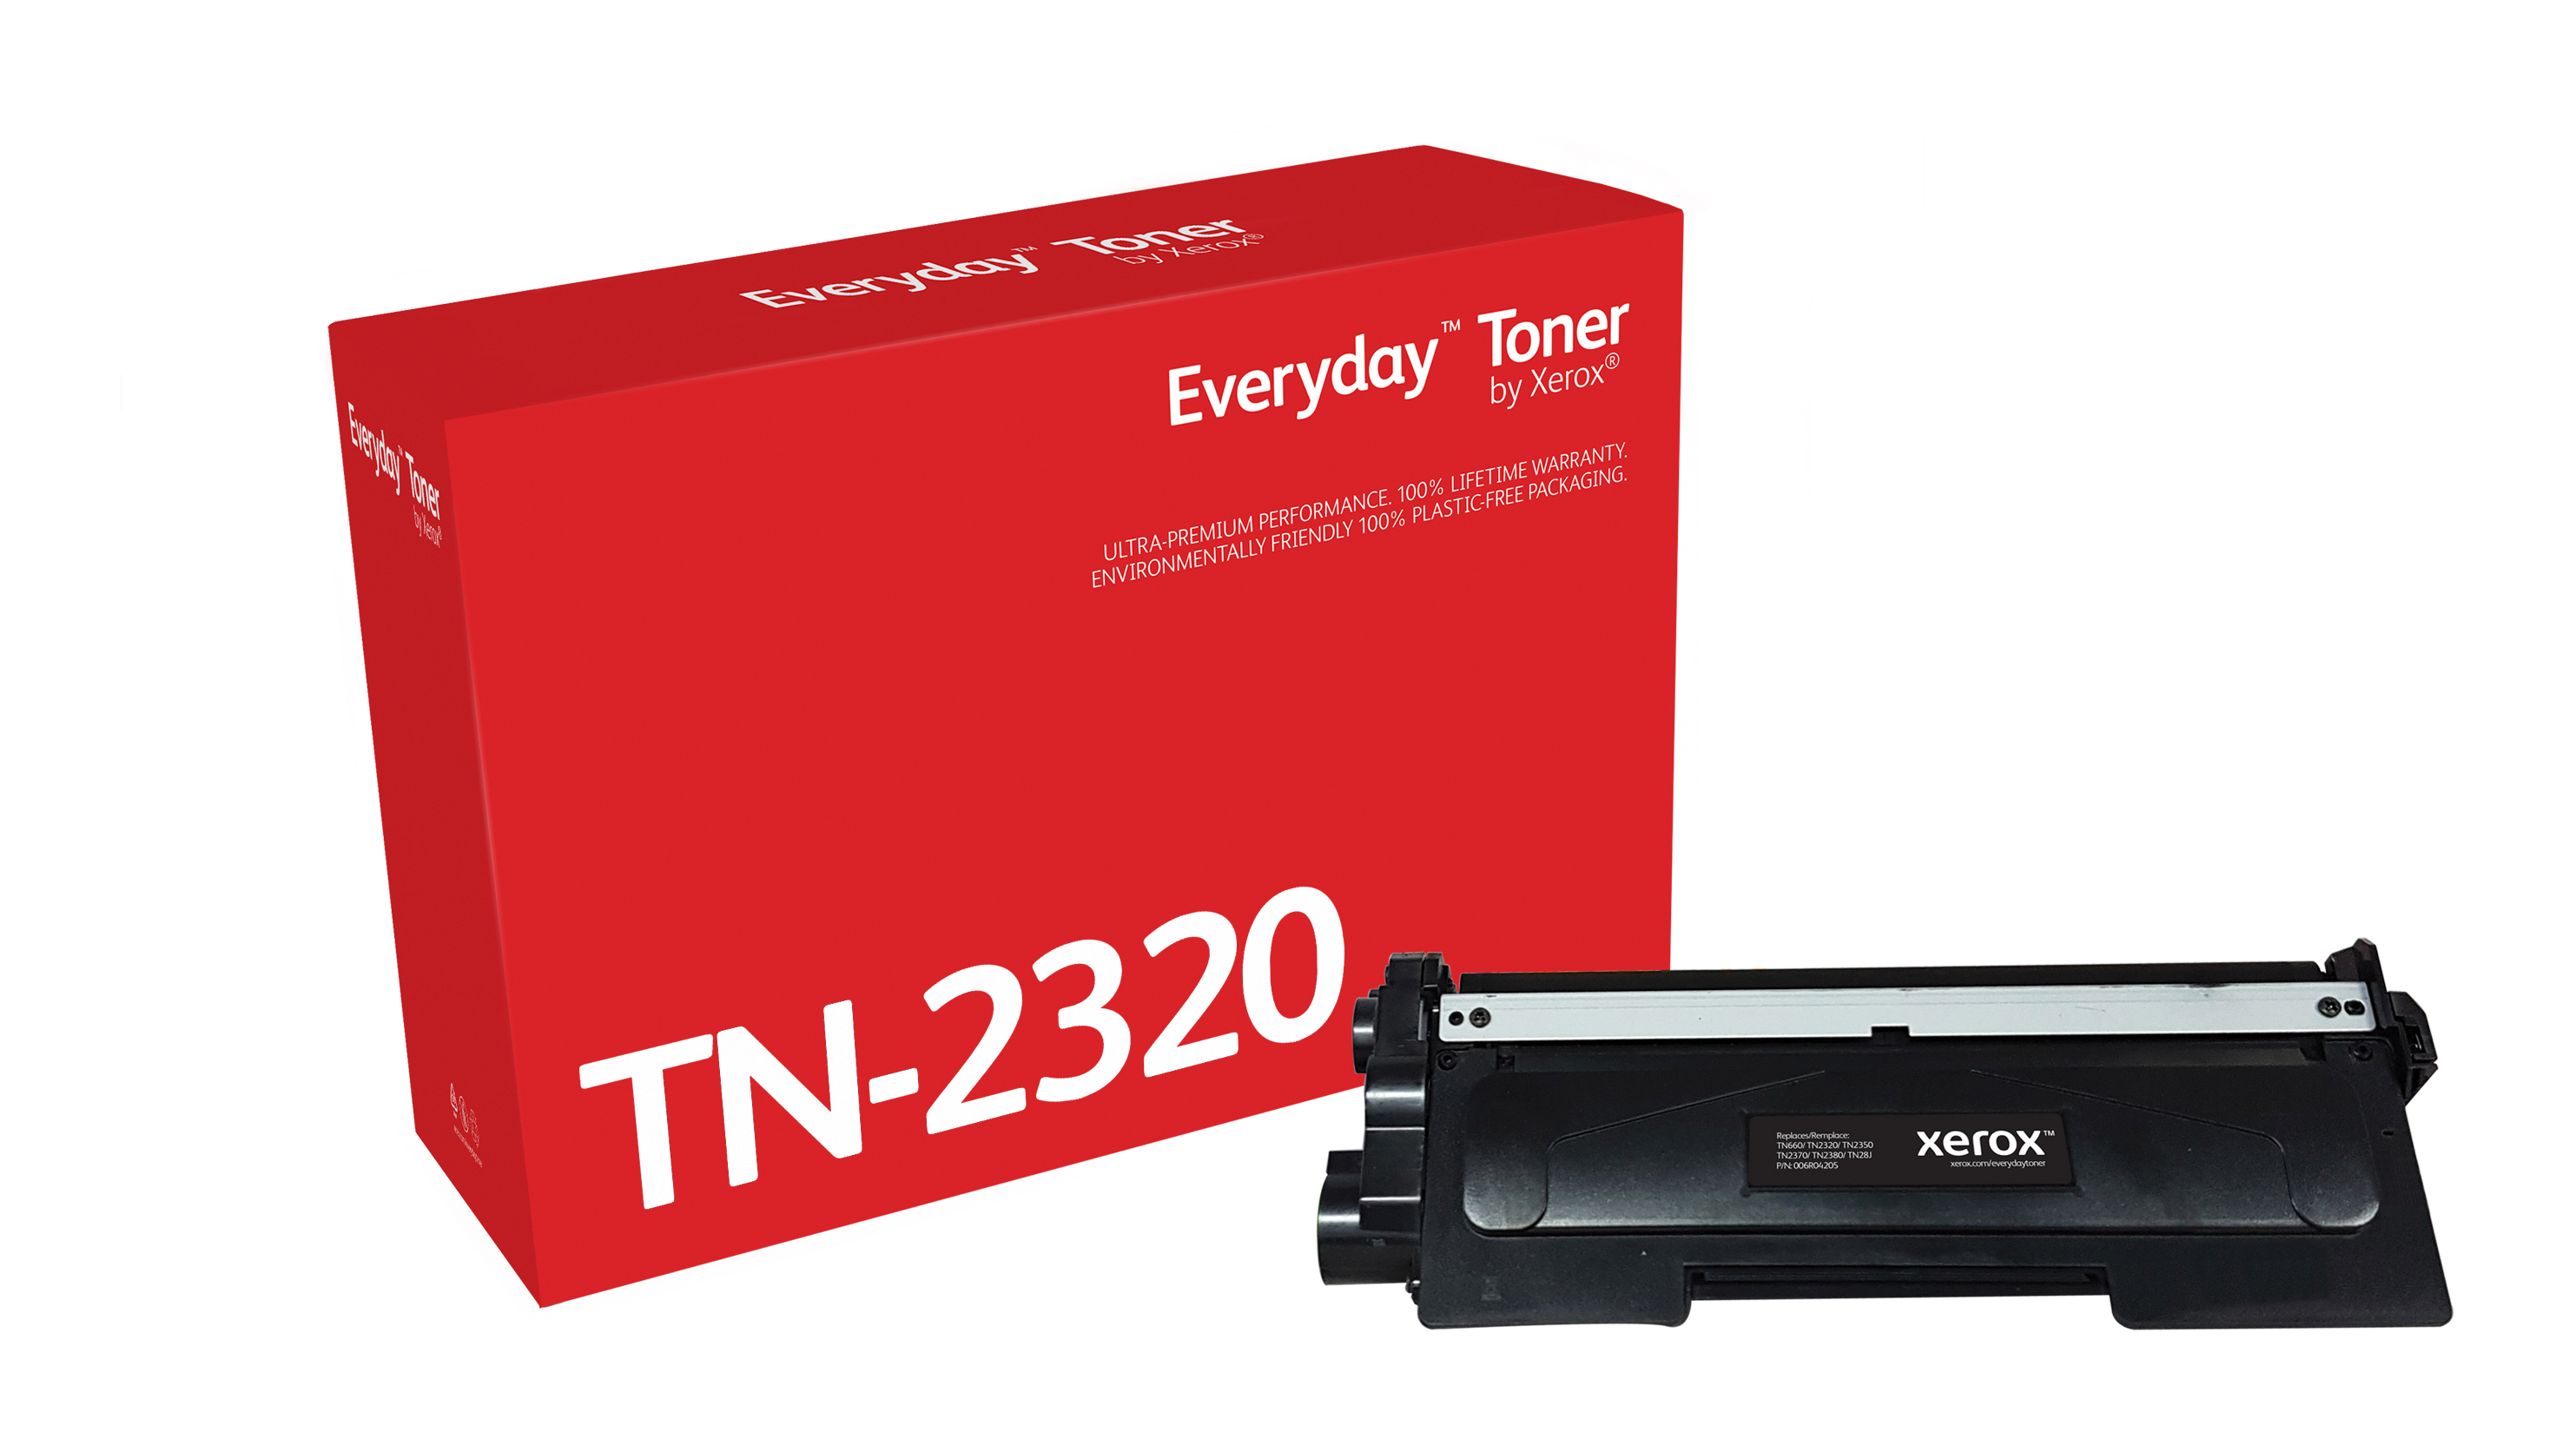 Everyday compatible TN-2320 006R04205 by Xerox